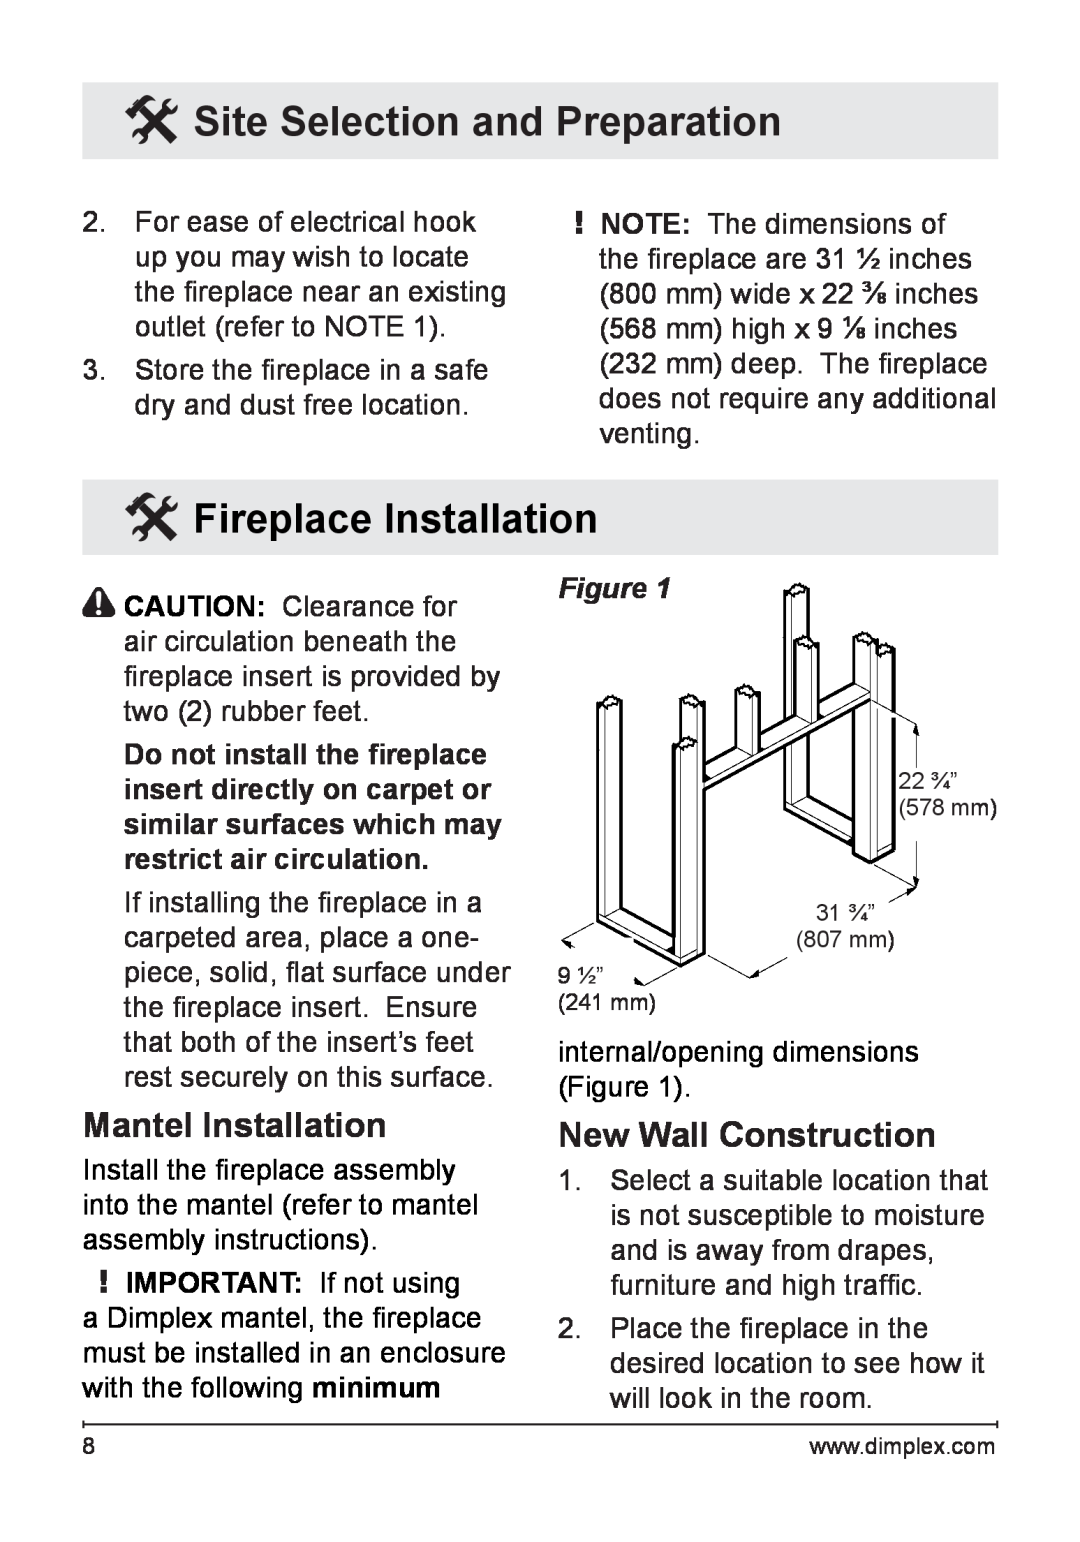 Dimplex DFG3033 Fireplace Installation, Mantel Installation, New Wall Construction, Site Selection and Preparation 